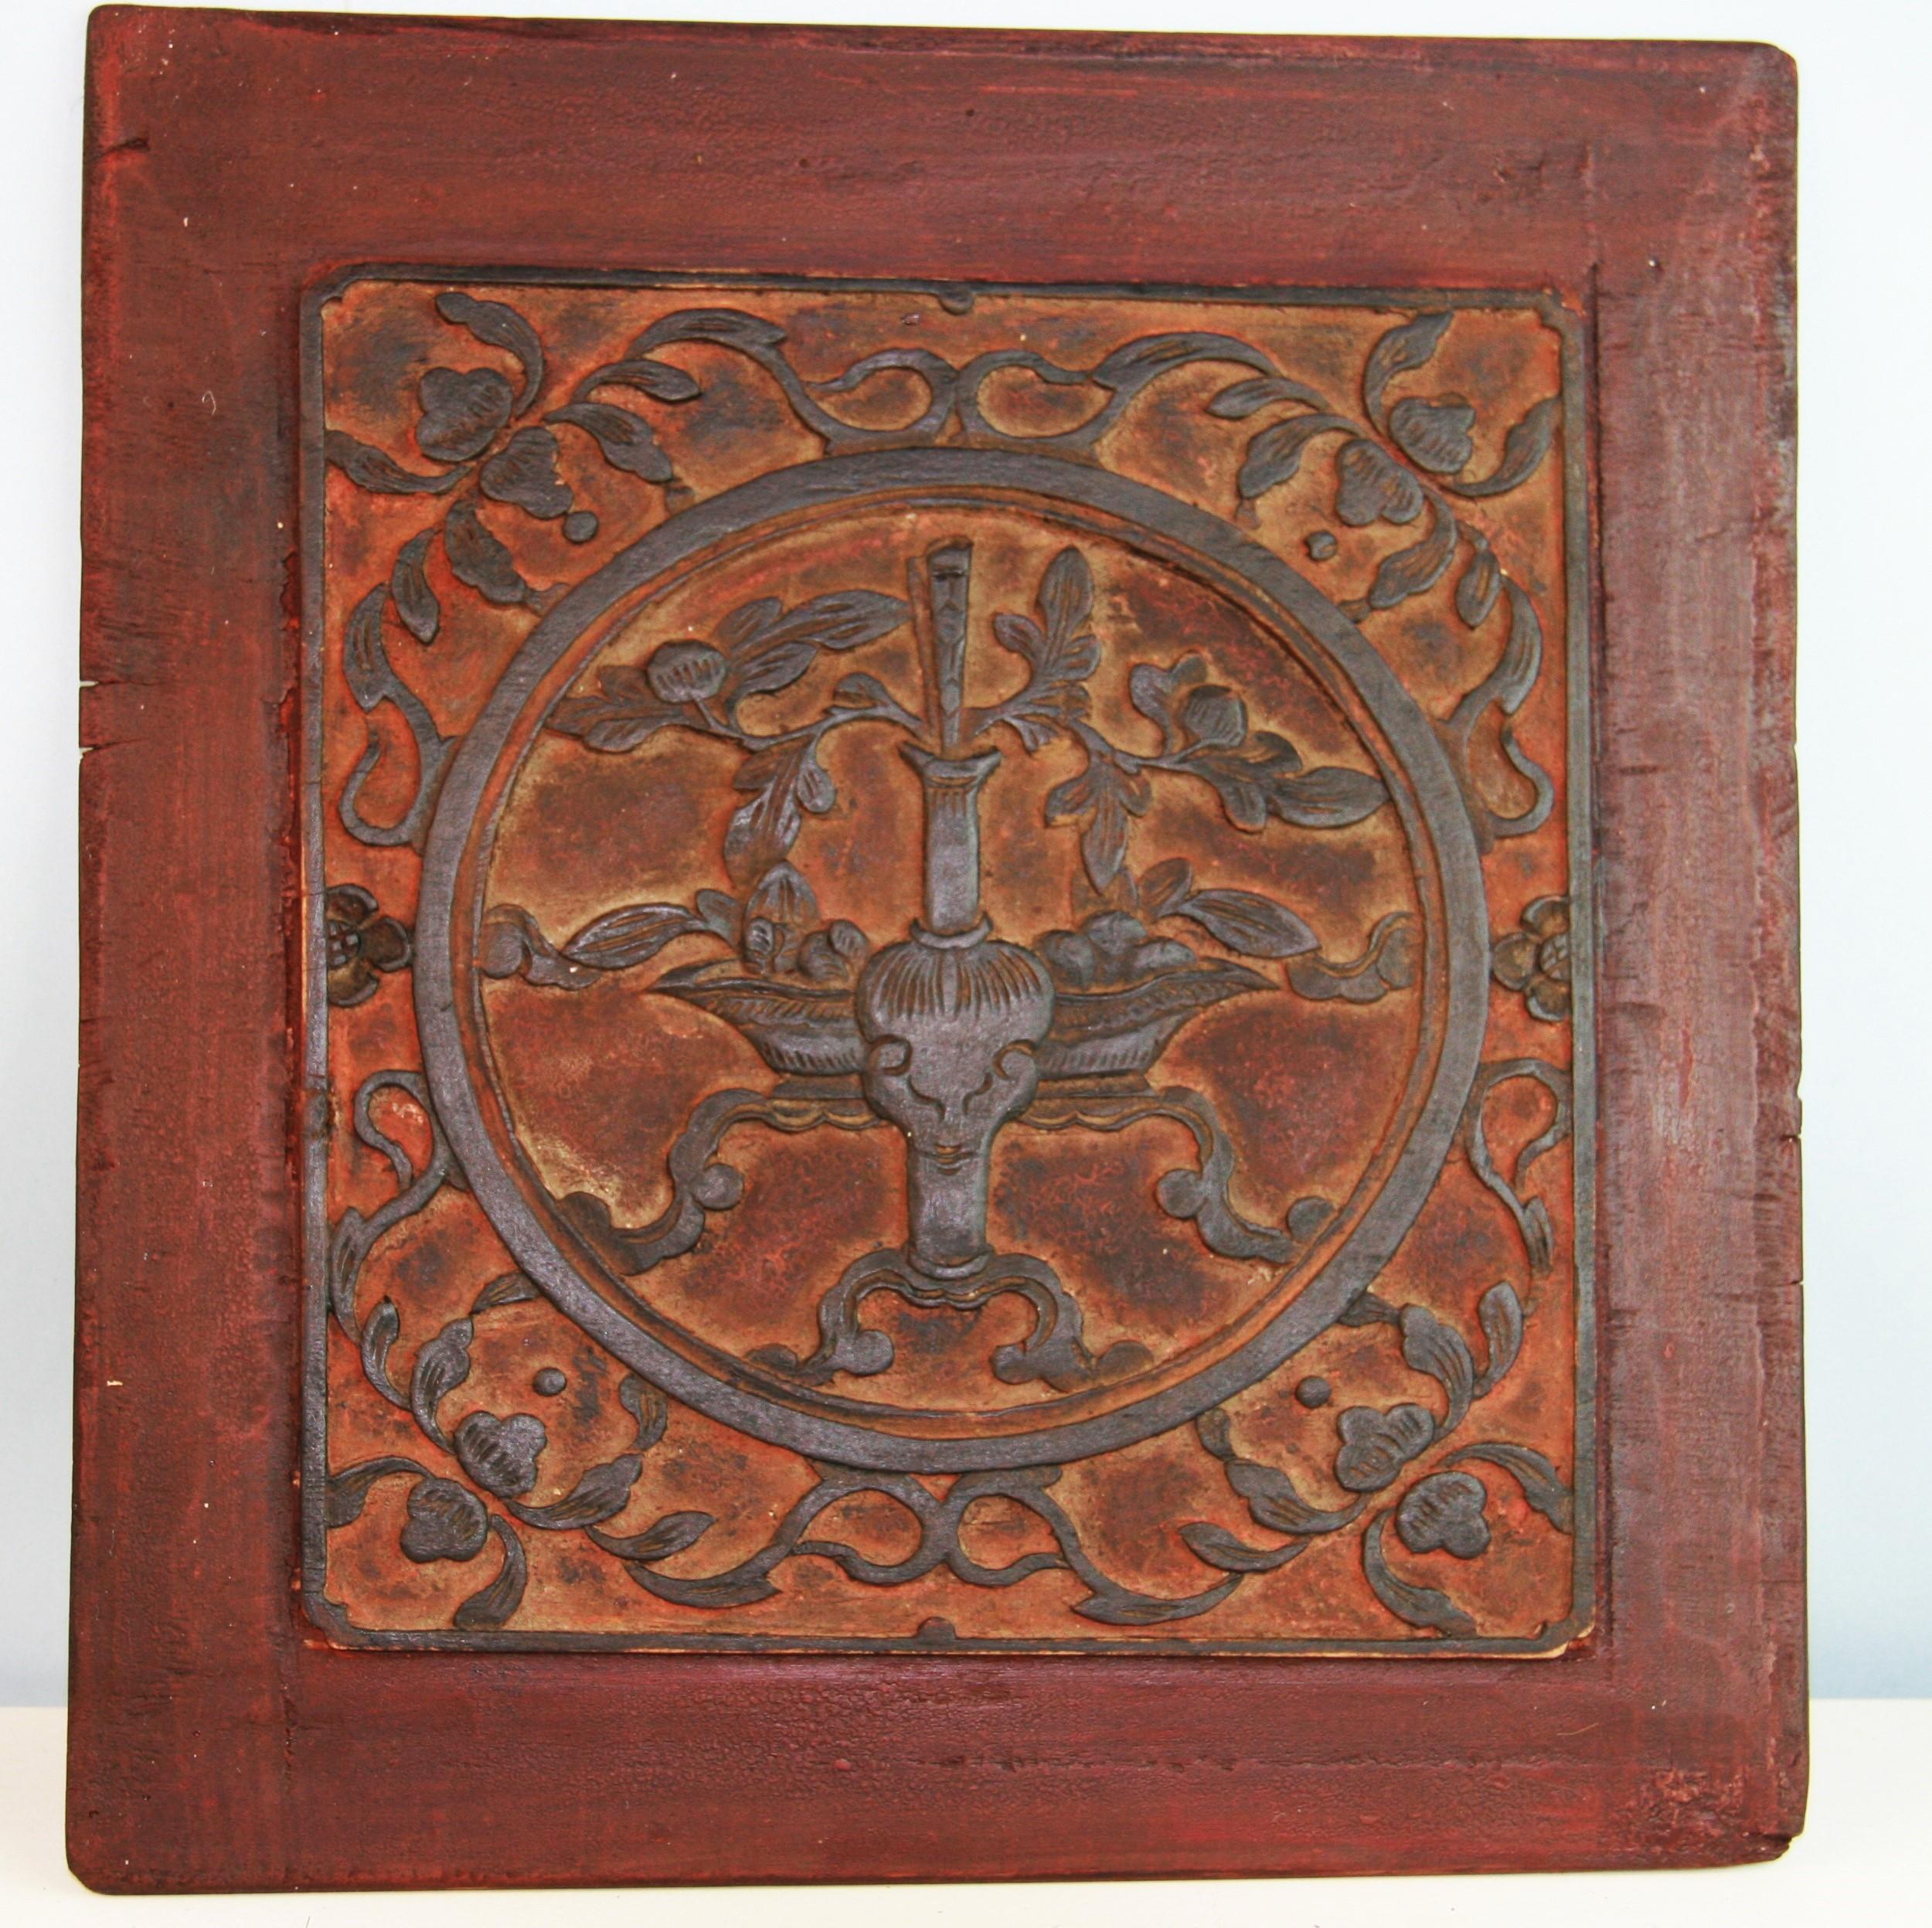 Japanese 18th century carved wood architectural panel.